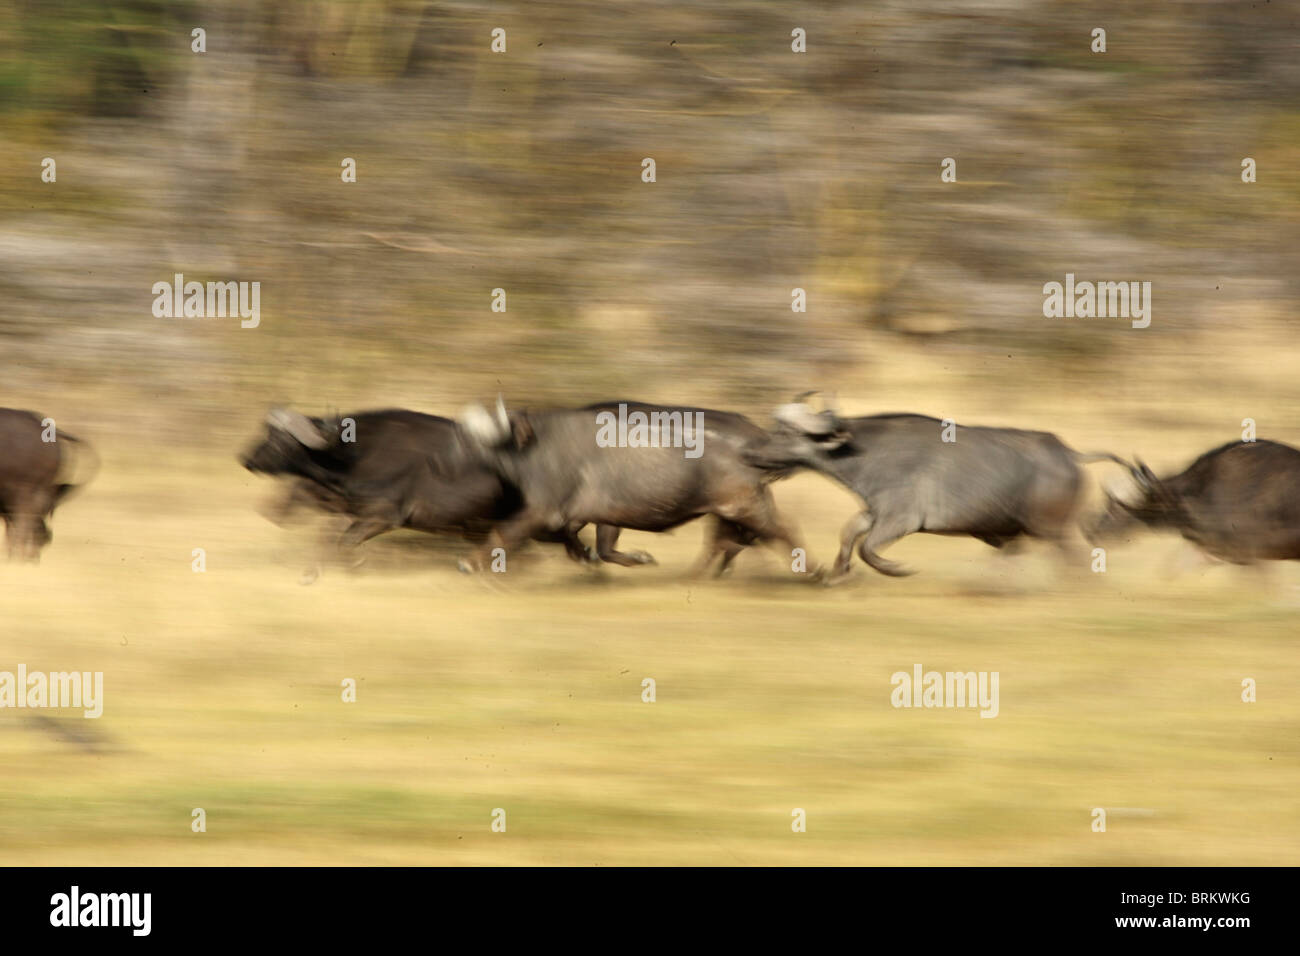 Abstract shot of Buffalo stampede Stock Photo